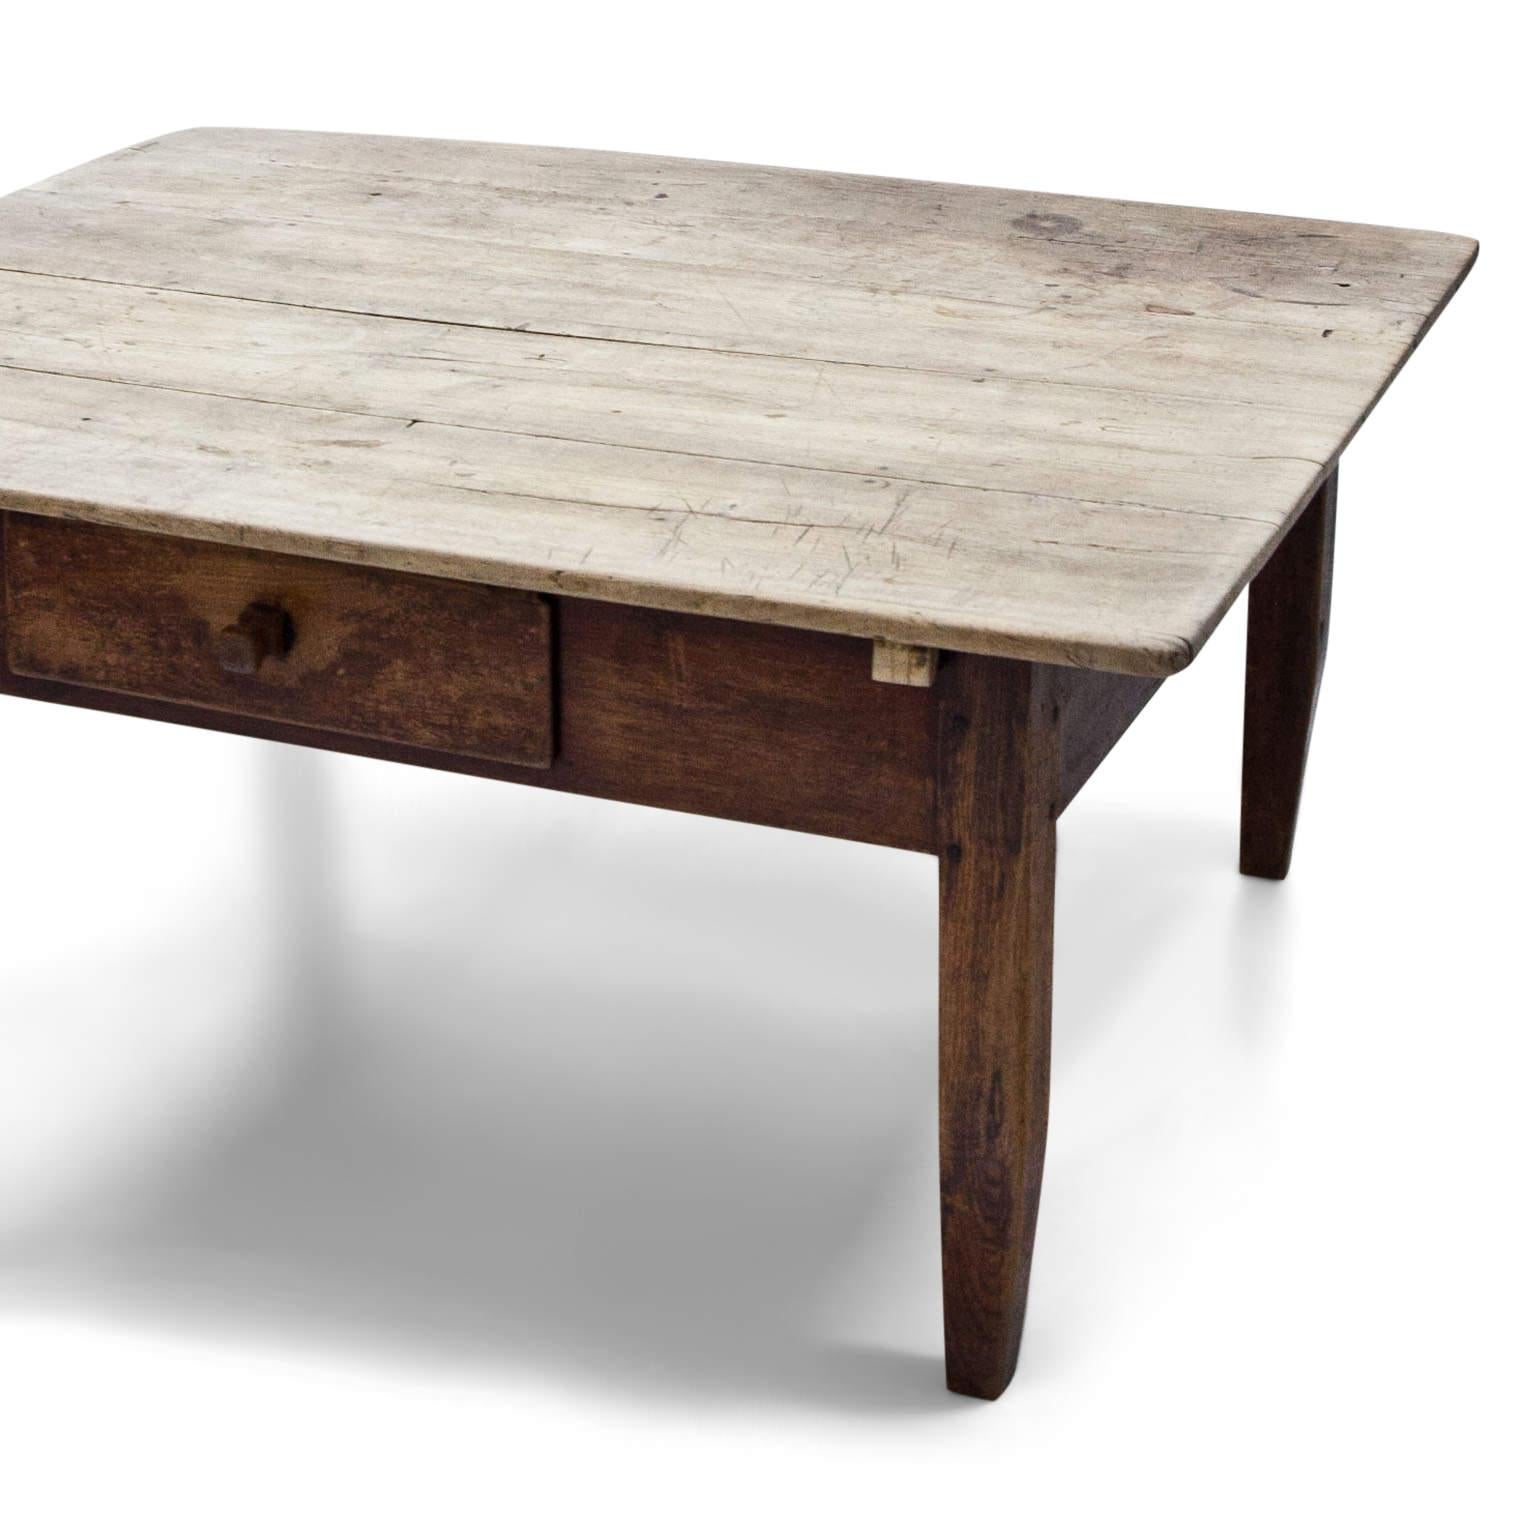 Low coffee table with one drawer and short legs. The tabletop is maple, the base is pine. The table has its unusual height since the legs were shortened later. Very nice naturally aged patina.